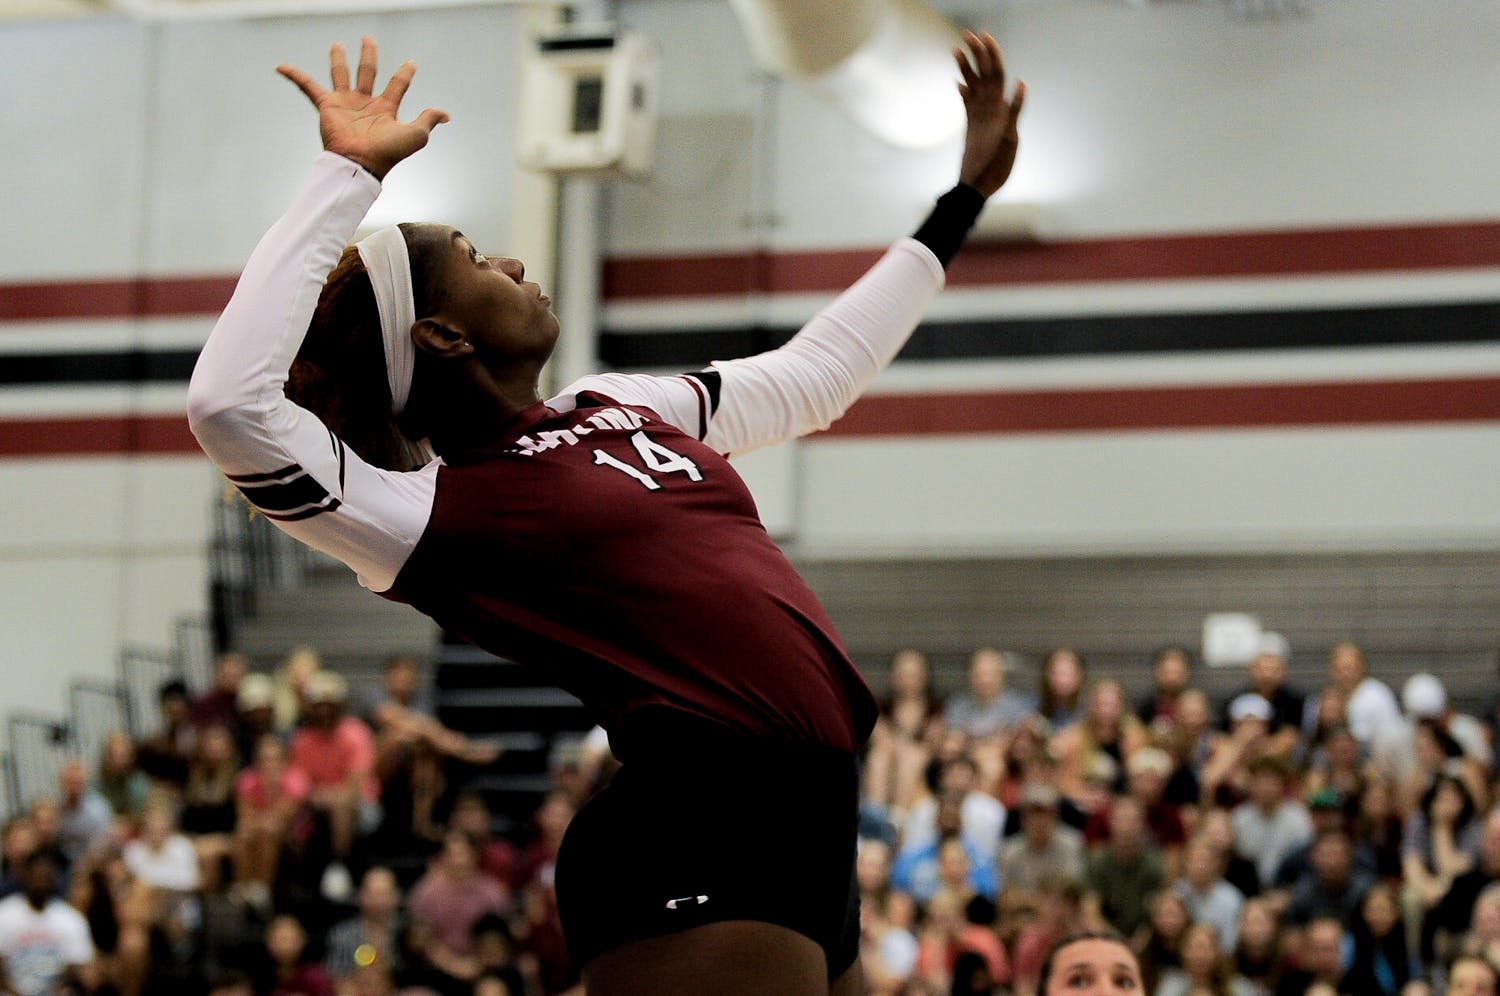 The South Carolina volleyball team started its 2022 campaign strong, winning all three of its matches in the Carolina Classic. The team dominated the weekend, losing only one set across all three games.&nbsp;